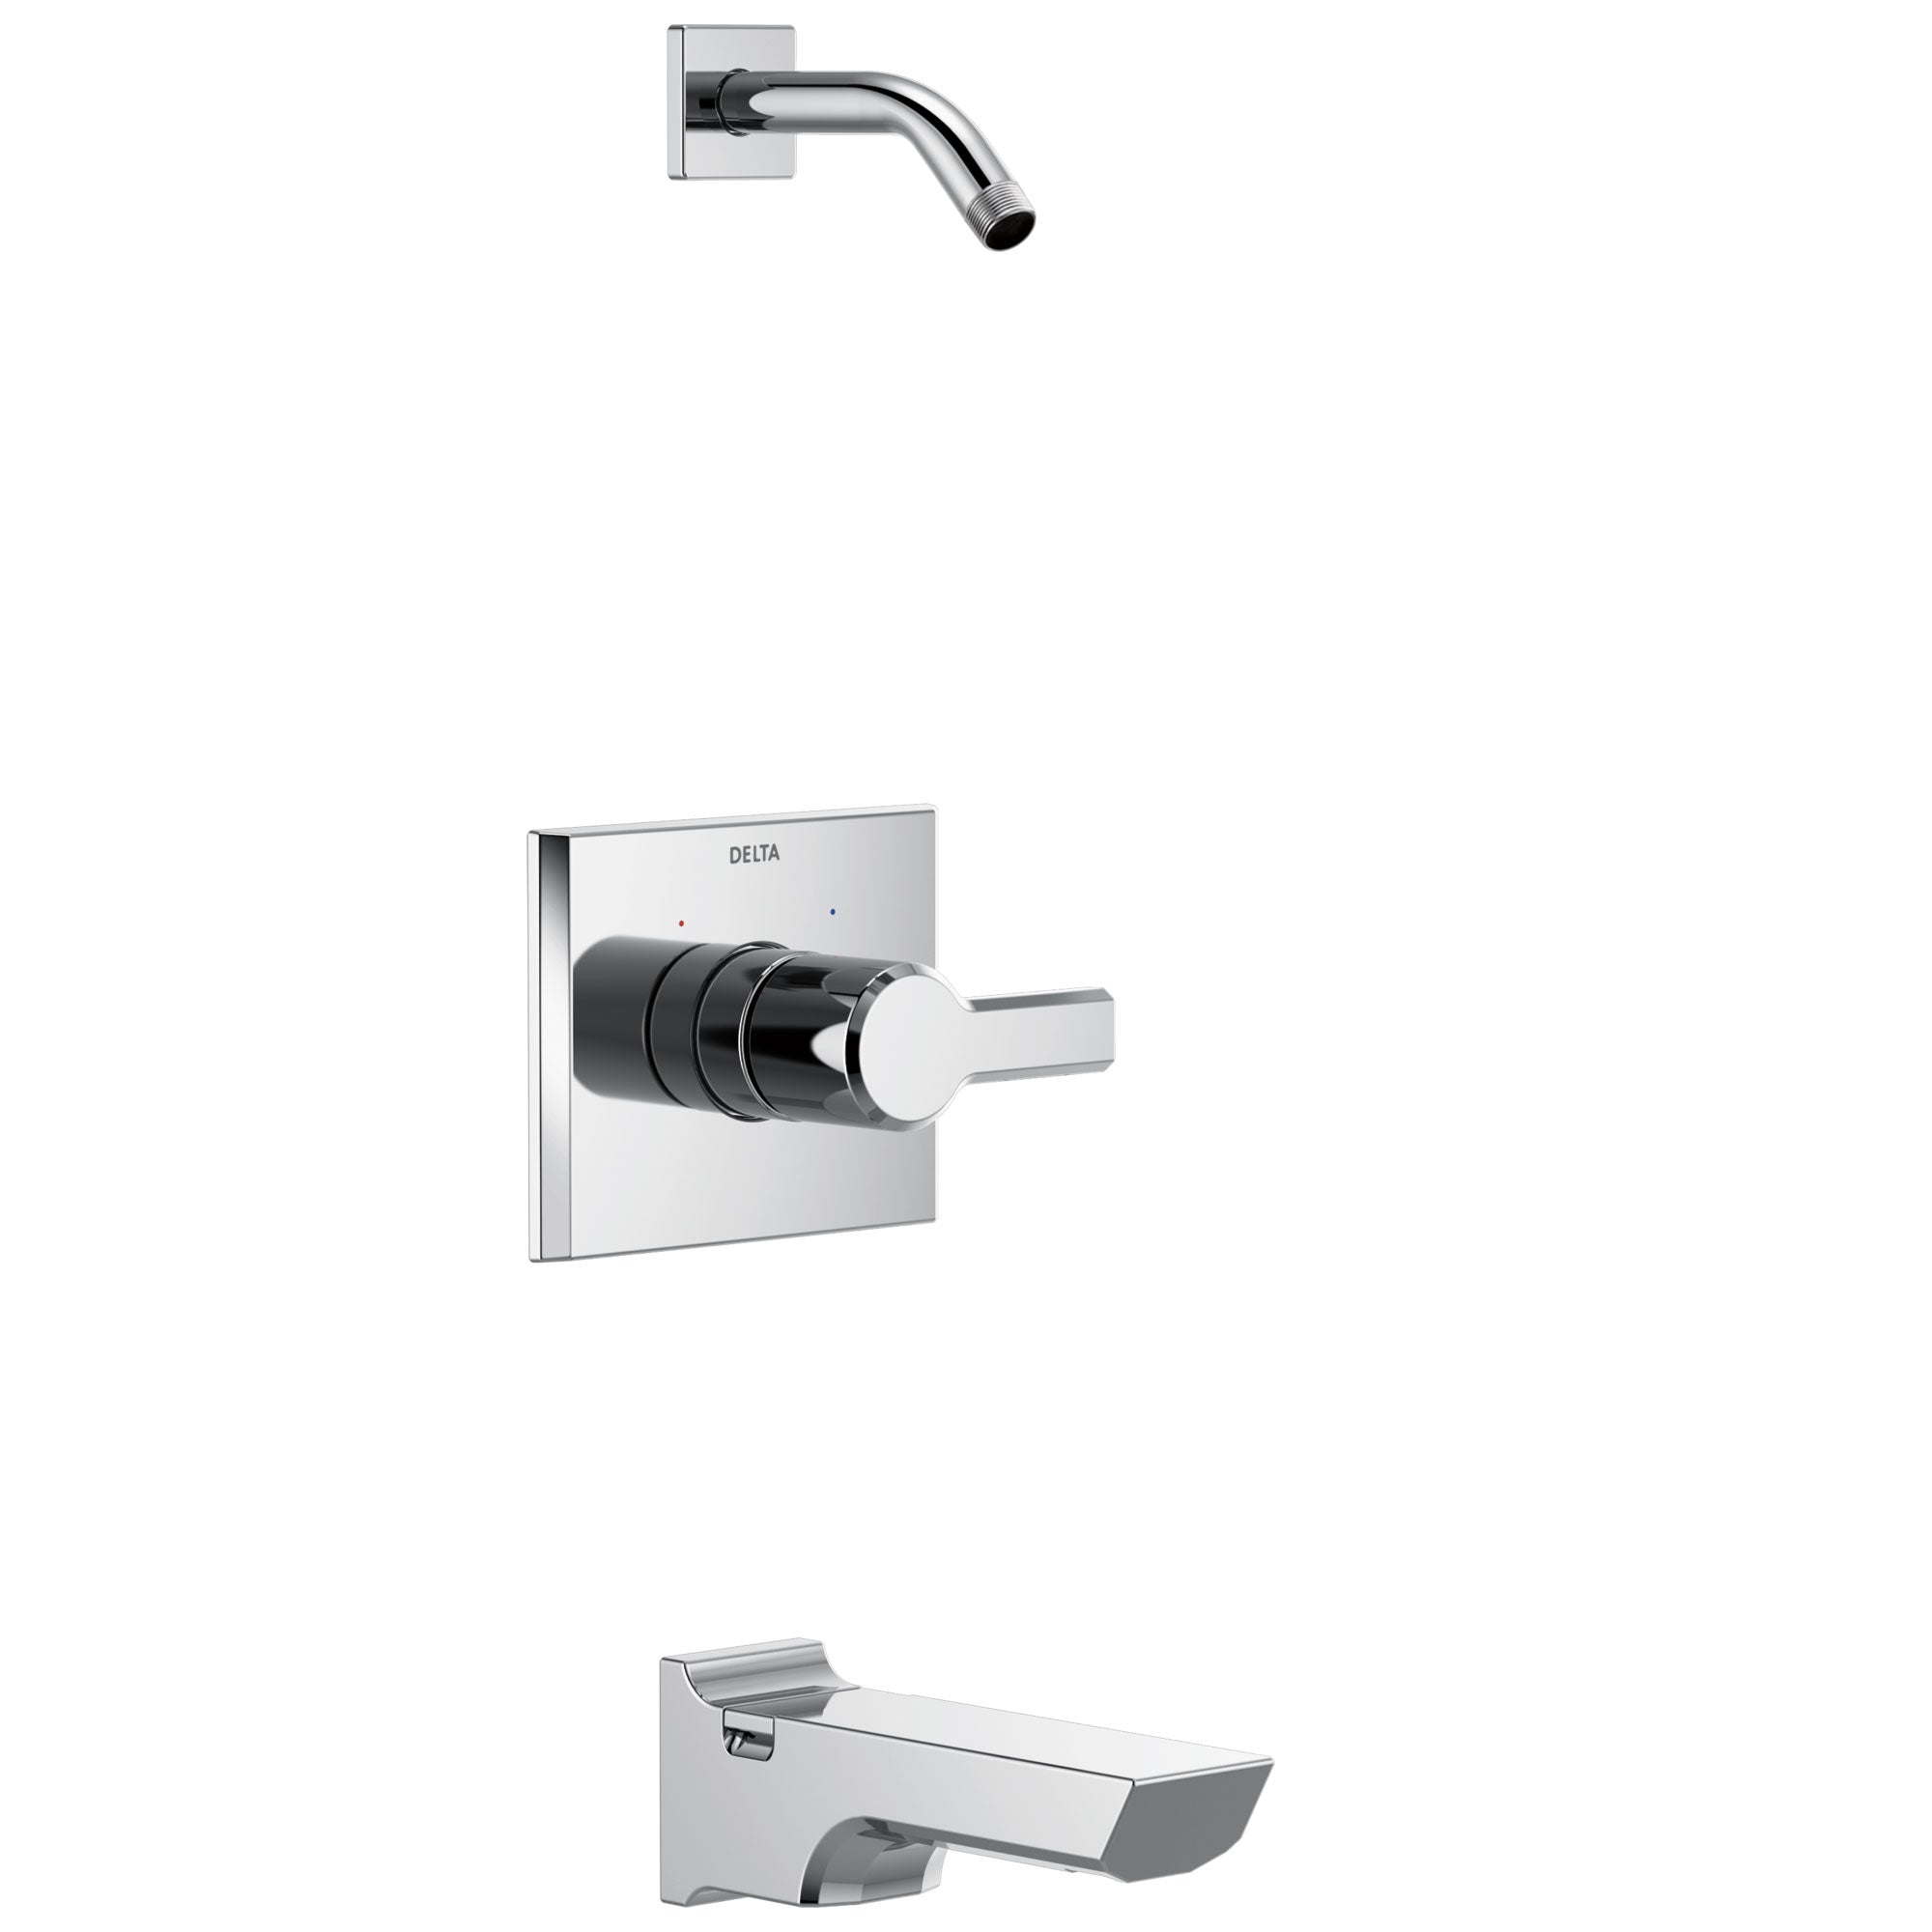 Delta Pivotal Chrome Finish 14 Series Tub and Shower Faucet Combo Less showerhead Includes Handle, Cartridge, and Valve with Stops D3420V